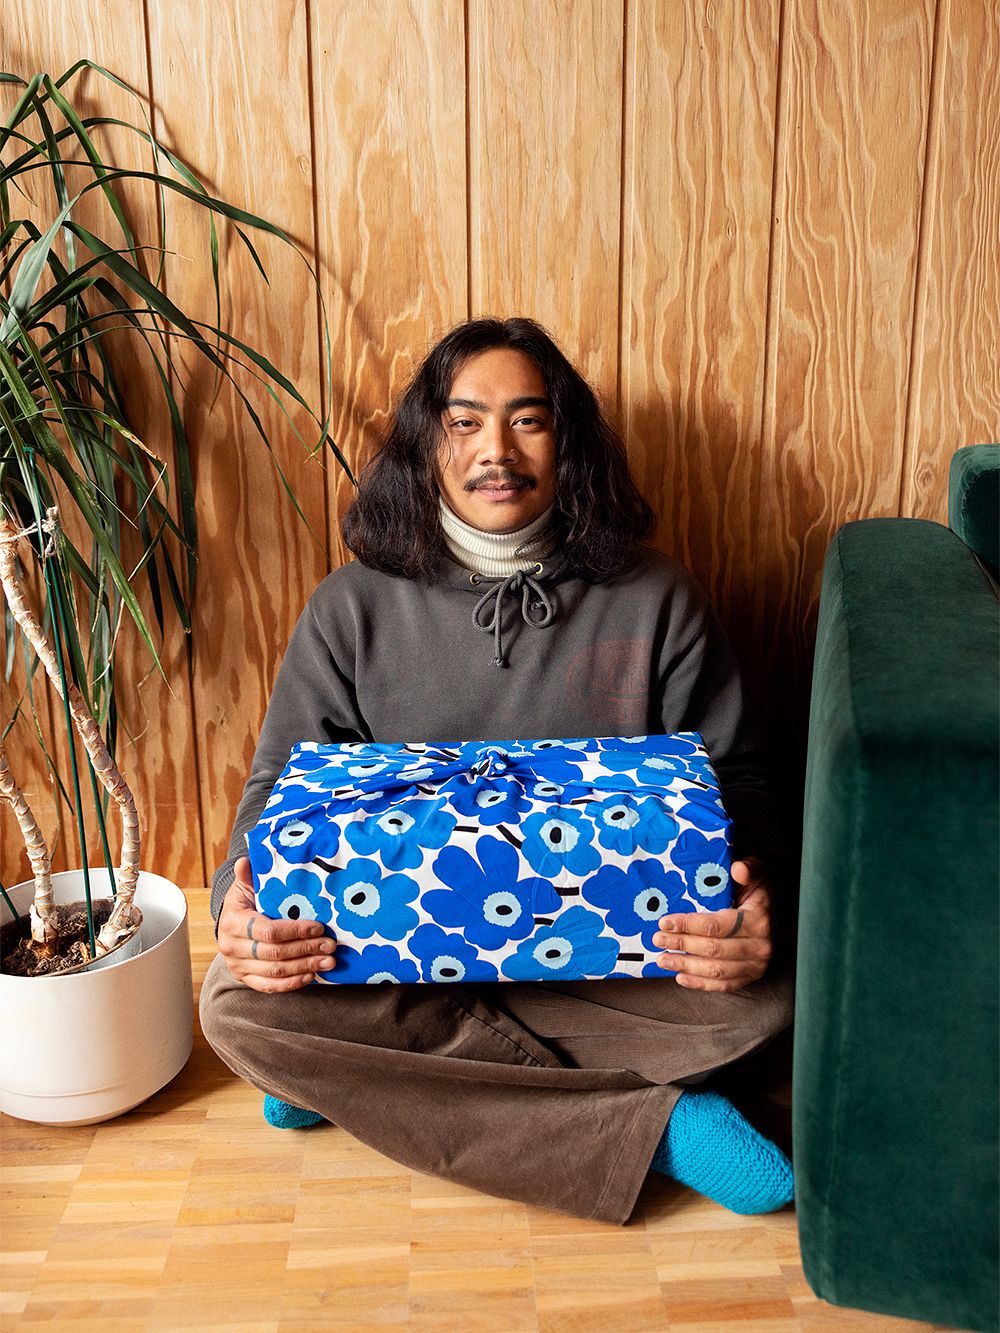 A person holding a large gift wrapped in Marimekko's Unikko fabric.